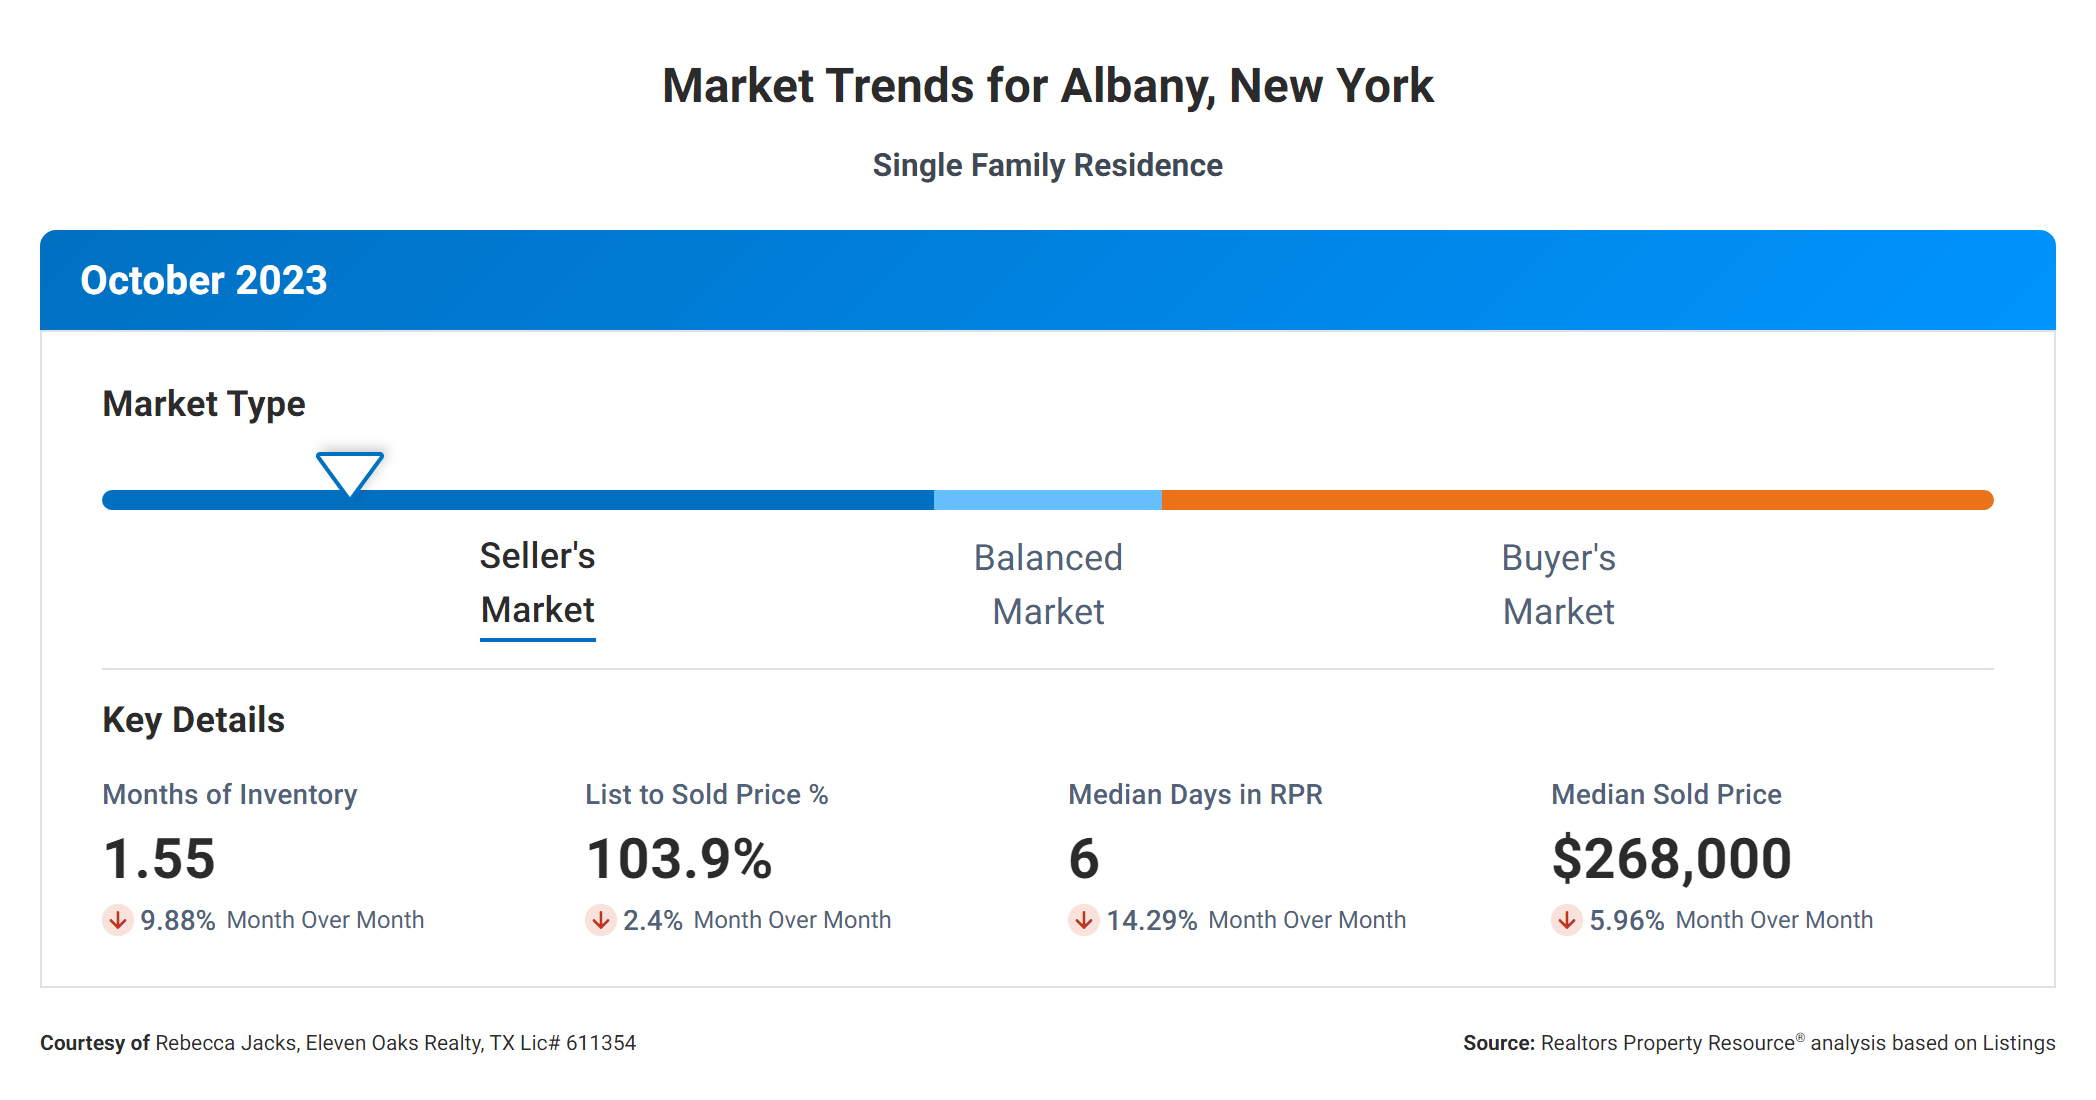 October 2023 market trends for Albany New York